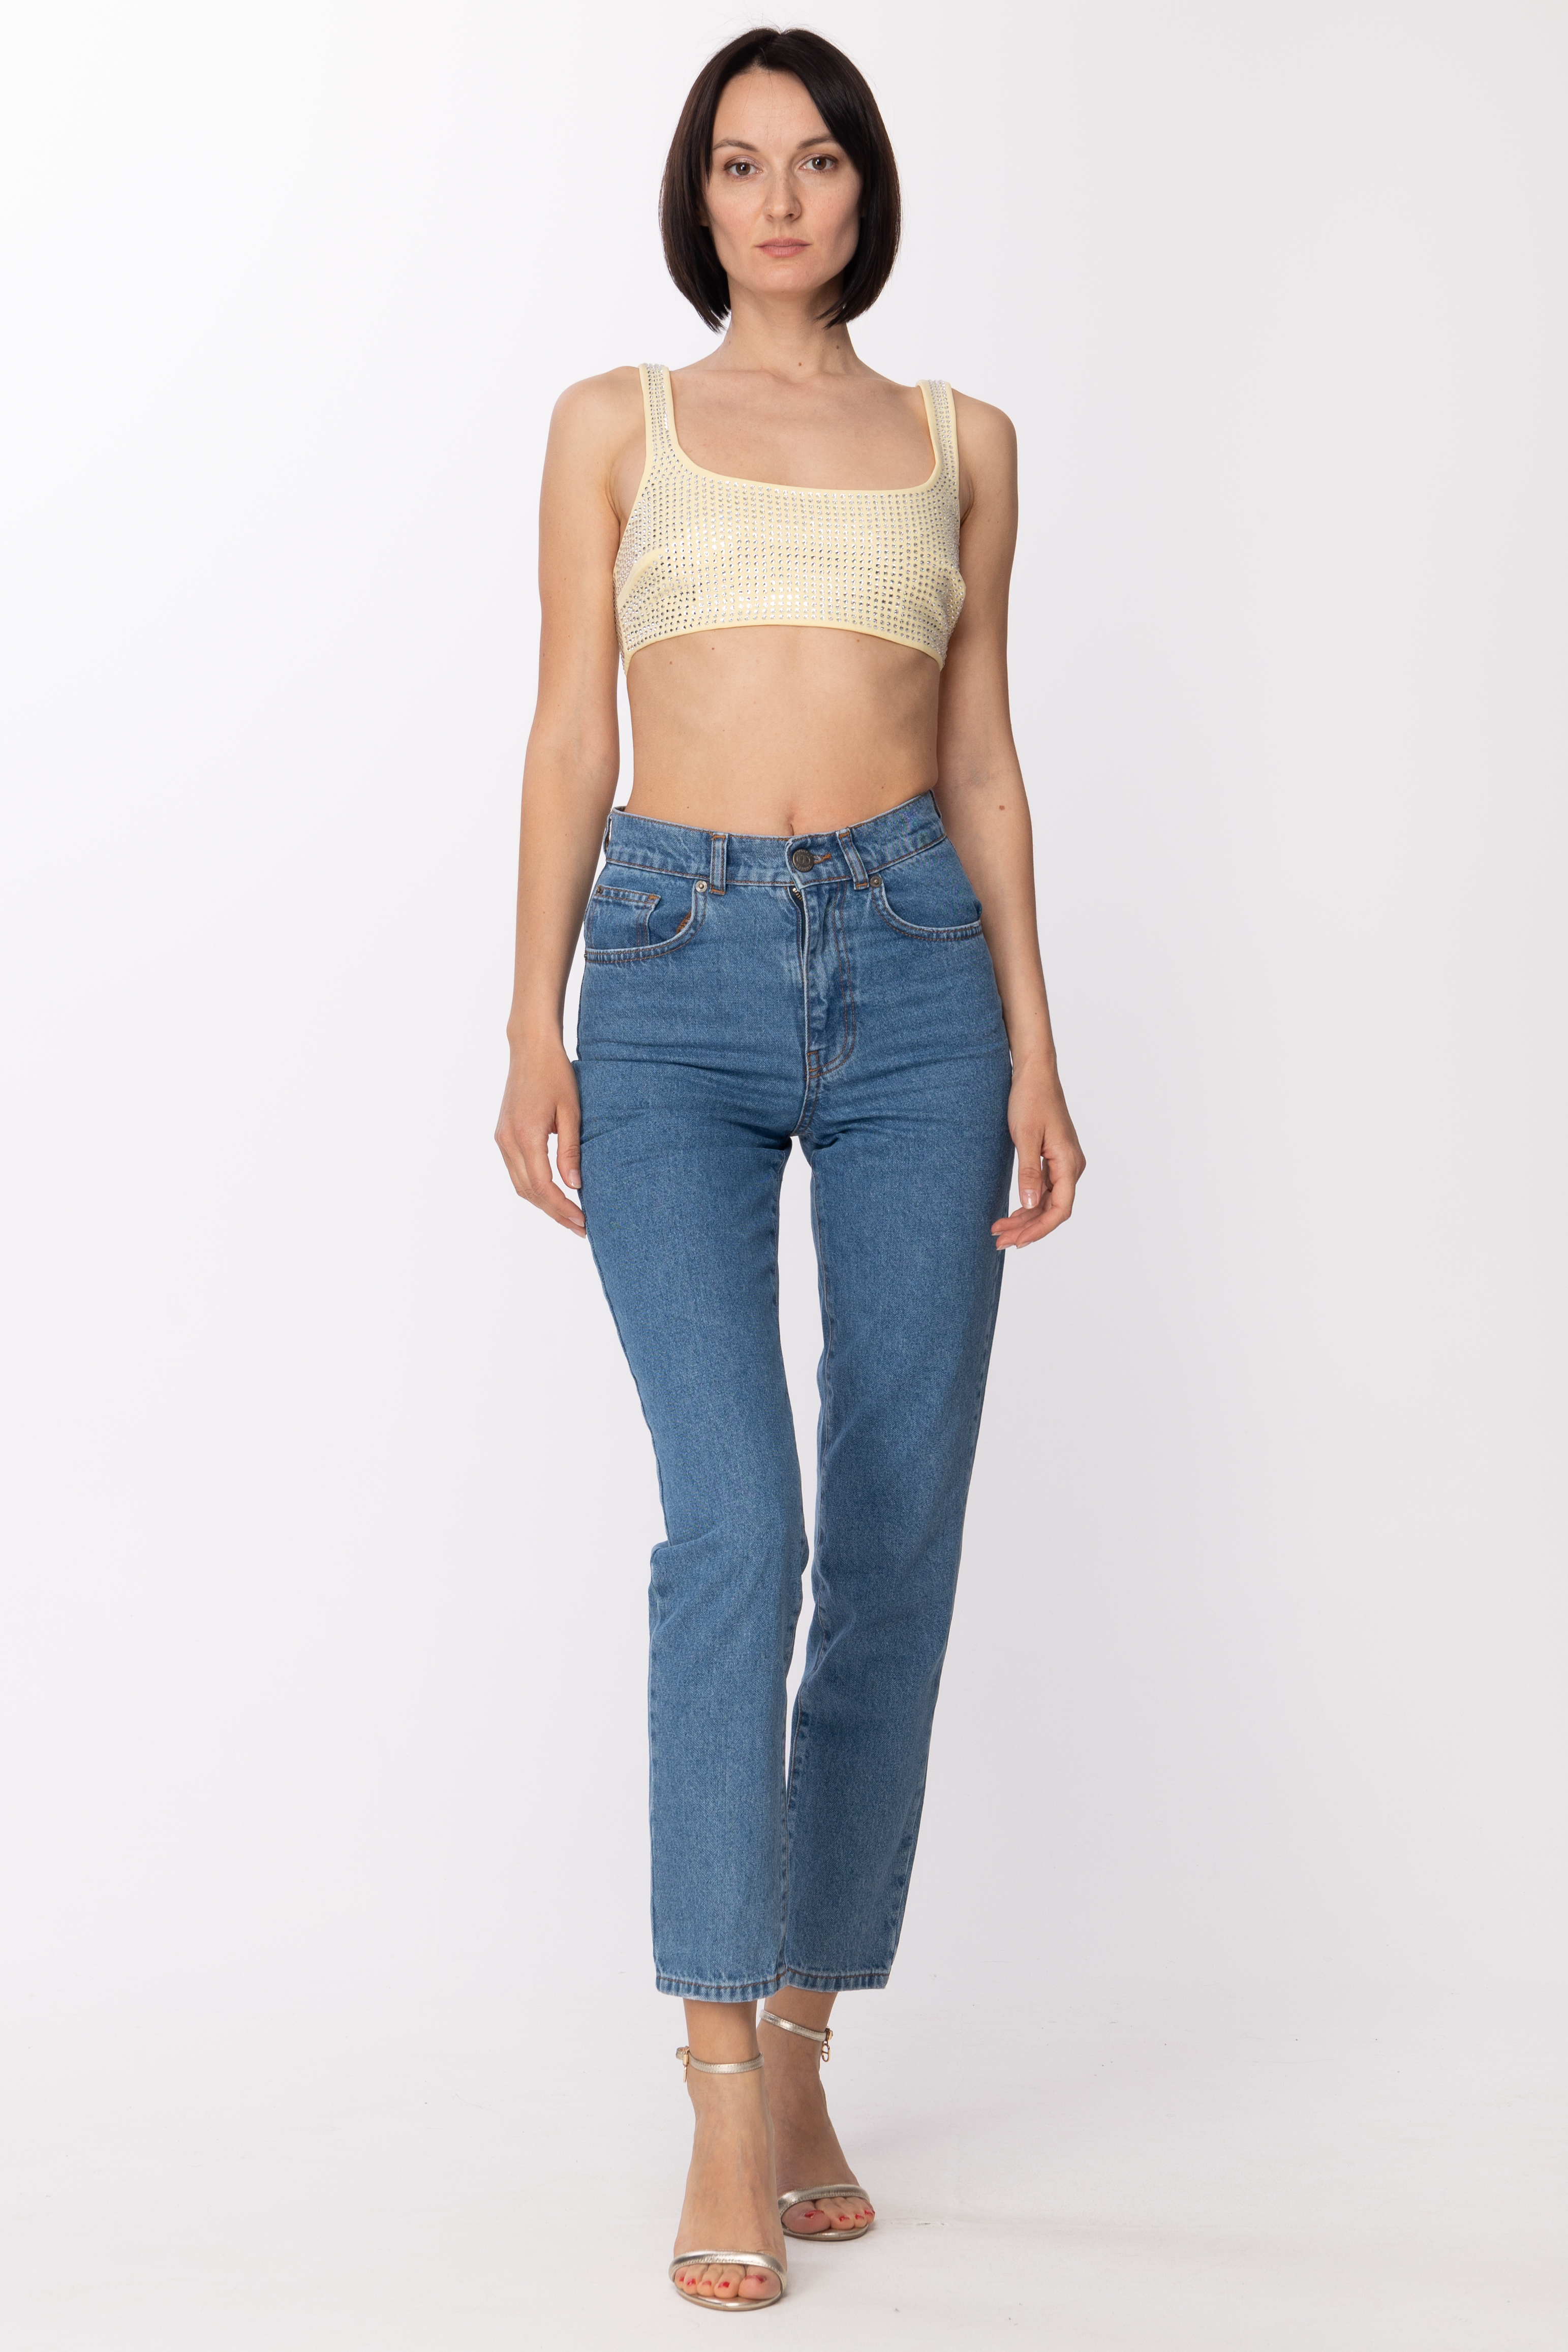 Preview: Patrizia Pepe Crop top with rhinestones Clarity Yellow